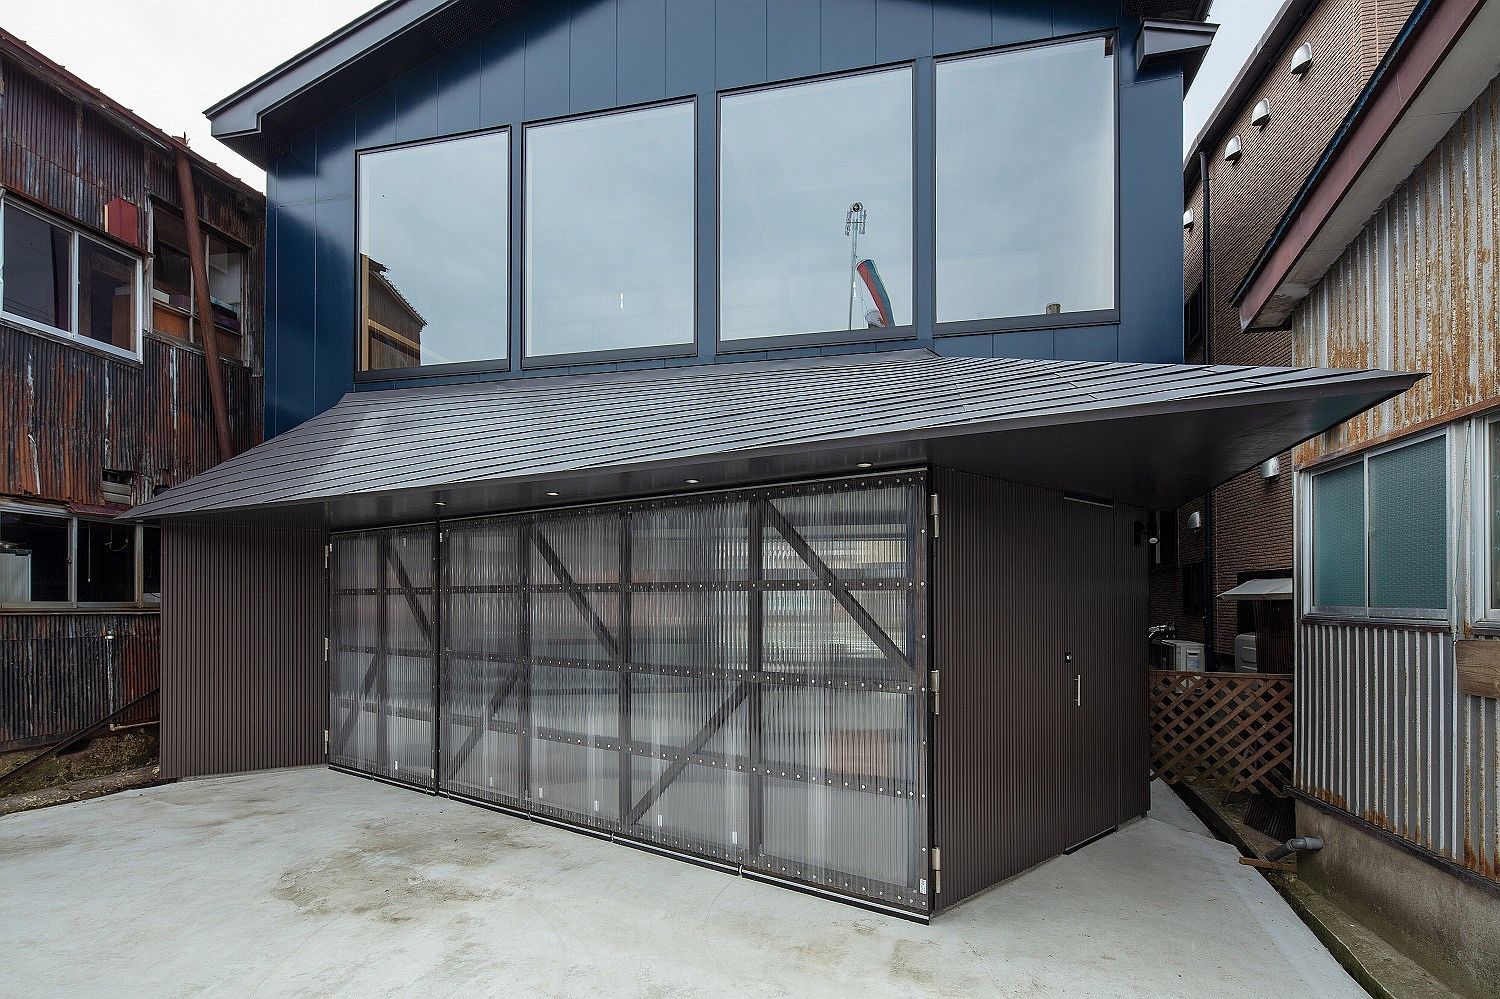 Metal-sheets-and-glass-create-an-adaptable-and-versatile-structure